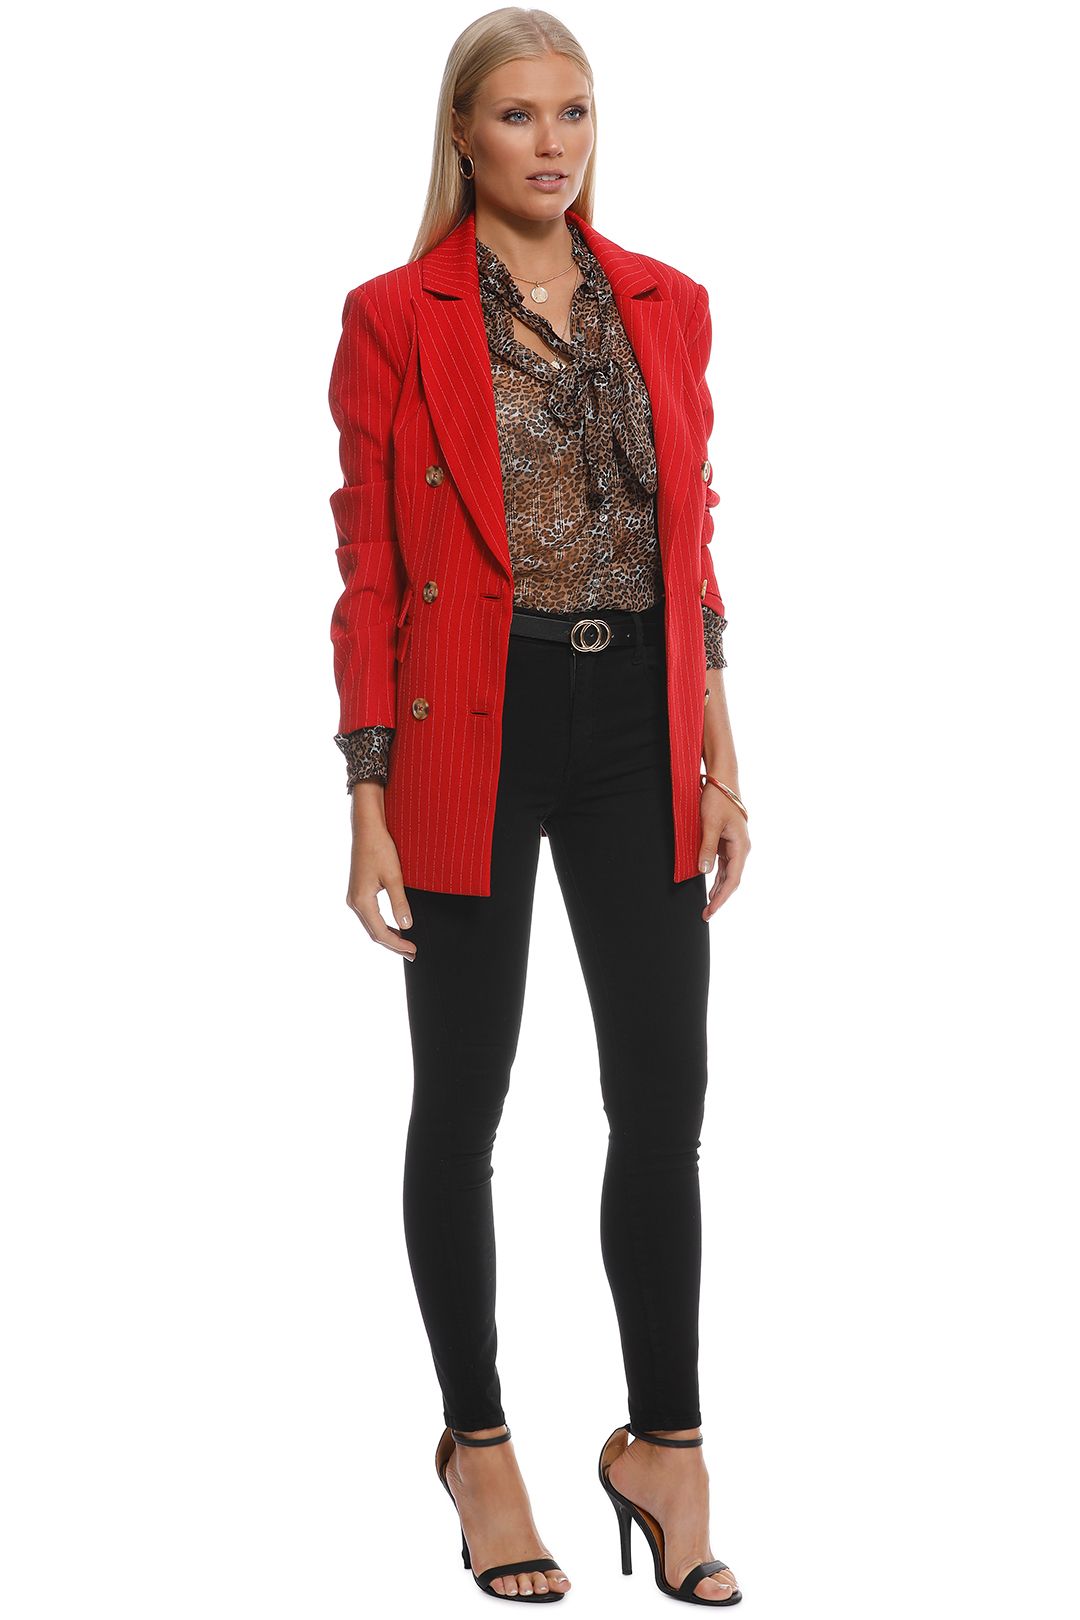 CMEO Collective - Go From Here Blazer - Red - Side